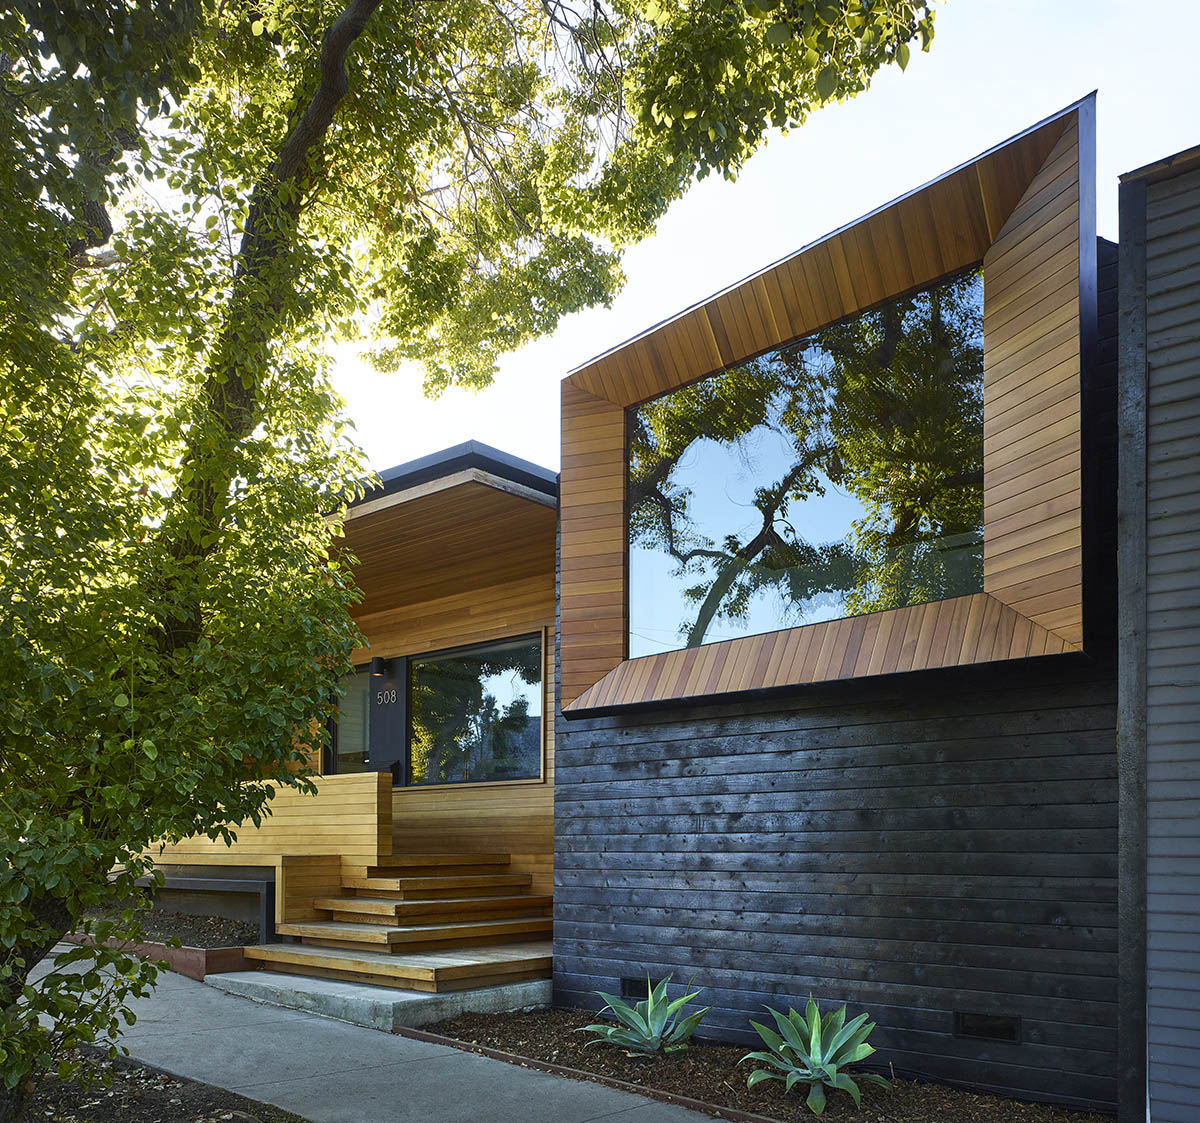 A customized and oversized window that sits in a wooden frame gives the front of the house a unique entrance.